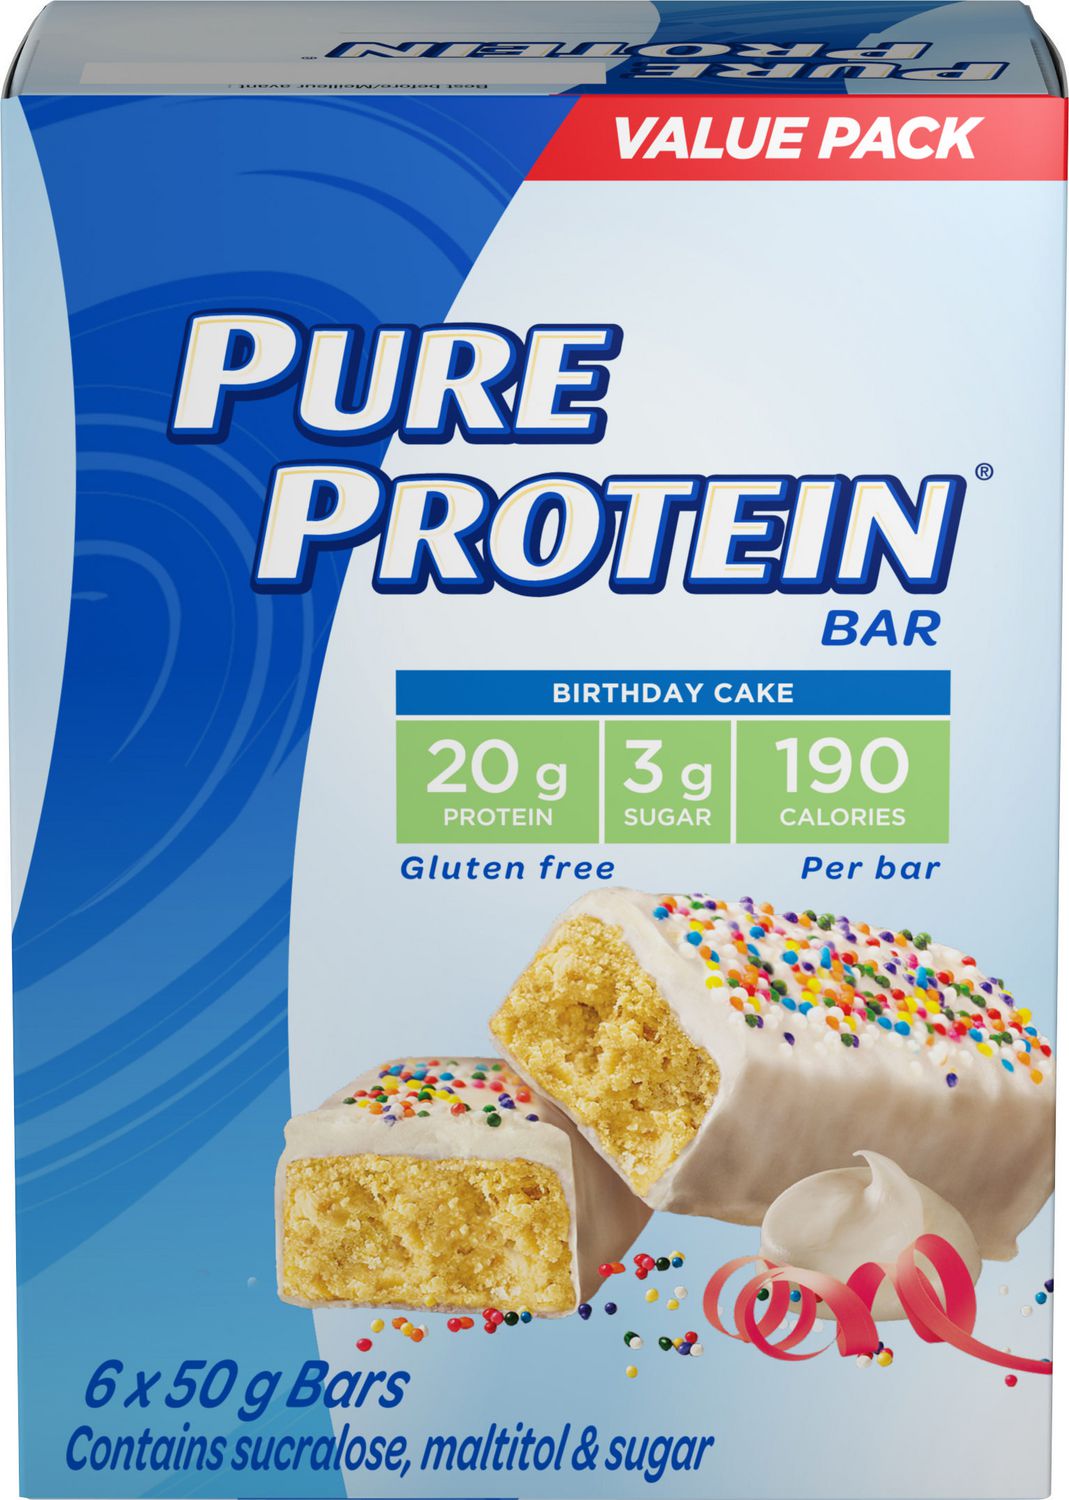 Pure Protein Birthday Cake 6x50G Value Pack